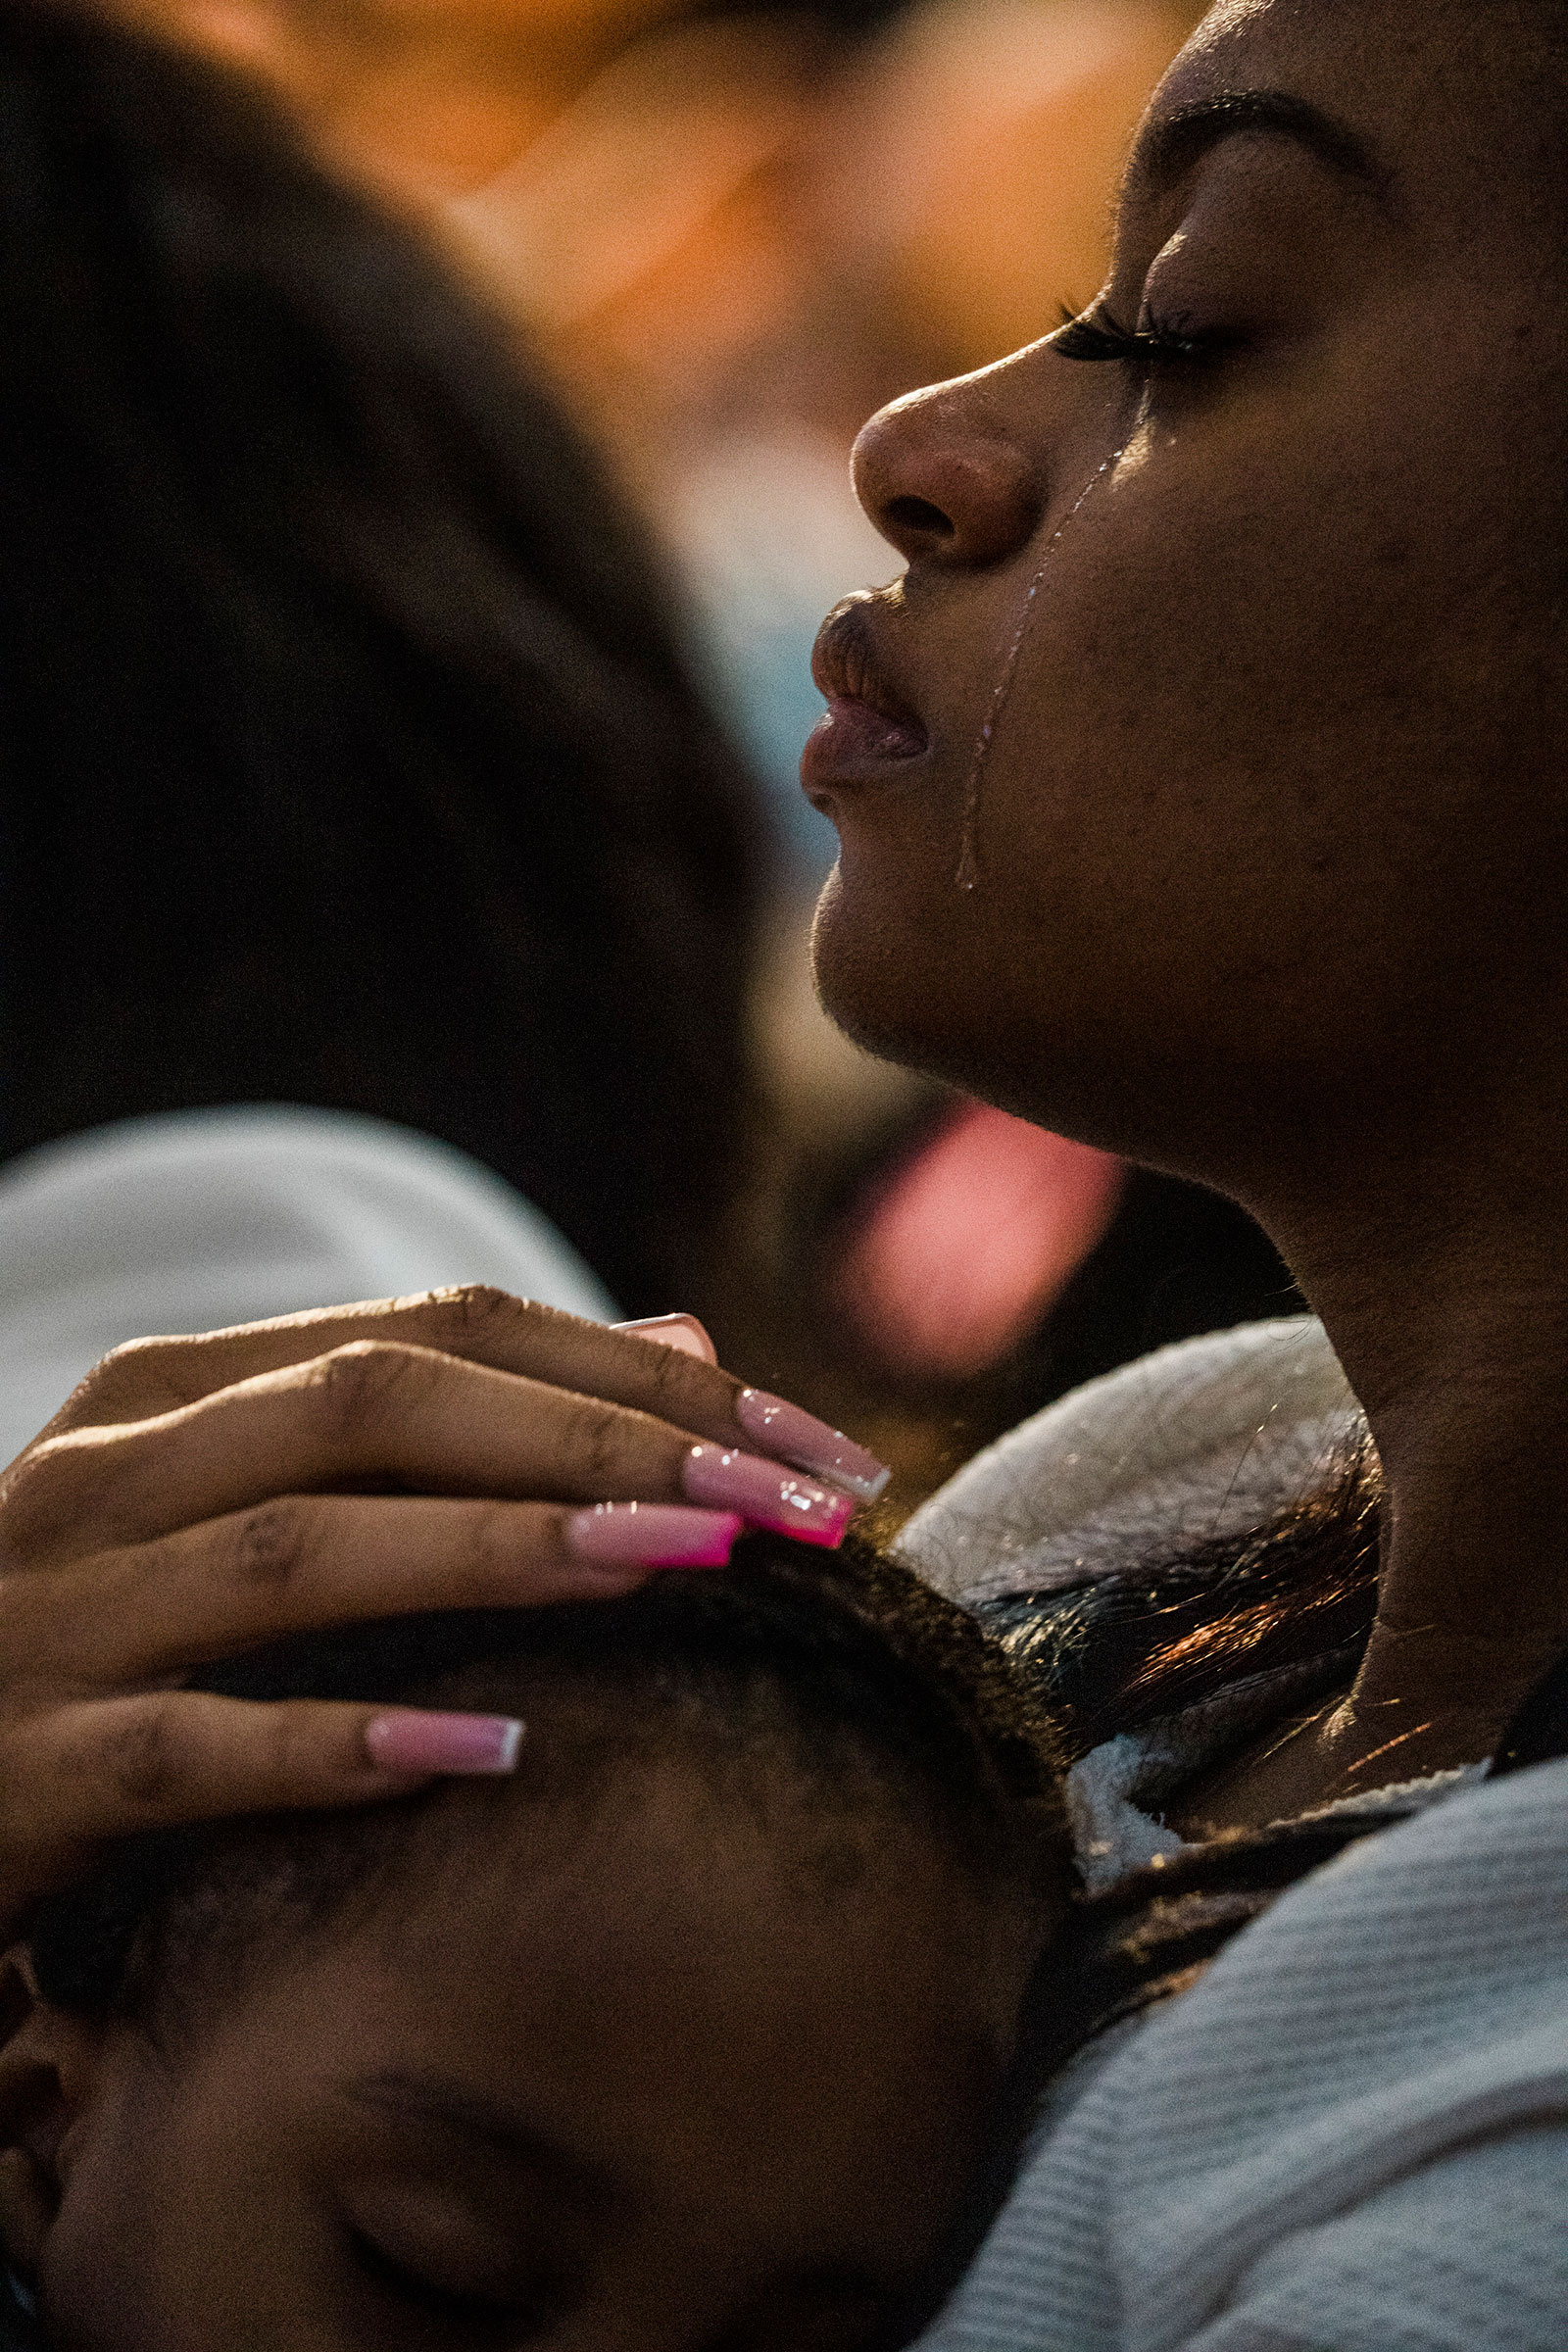 Charon Reed holds her son Koda and cries at the funeral of her grandmother, one of 10 killed in the racist massacre at a Tops grocery store, in Buffalo, N.Y., on May 24. (Gabriela Bhaskar—The New York Times/Redux)